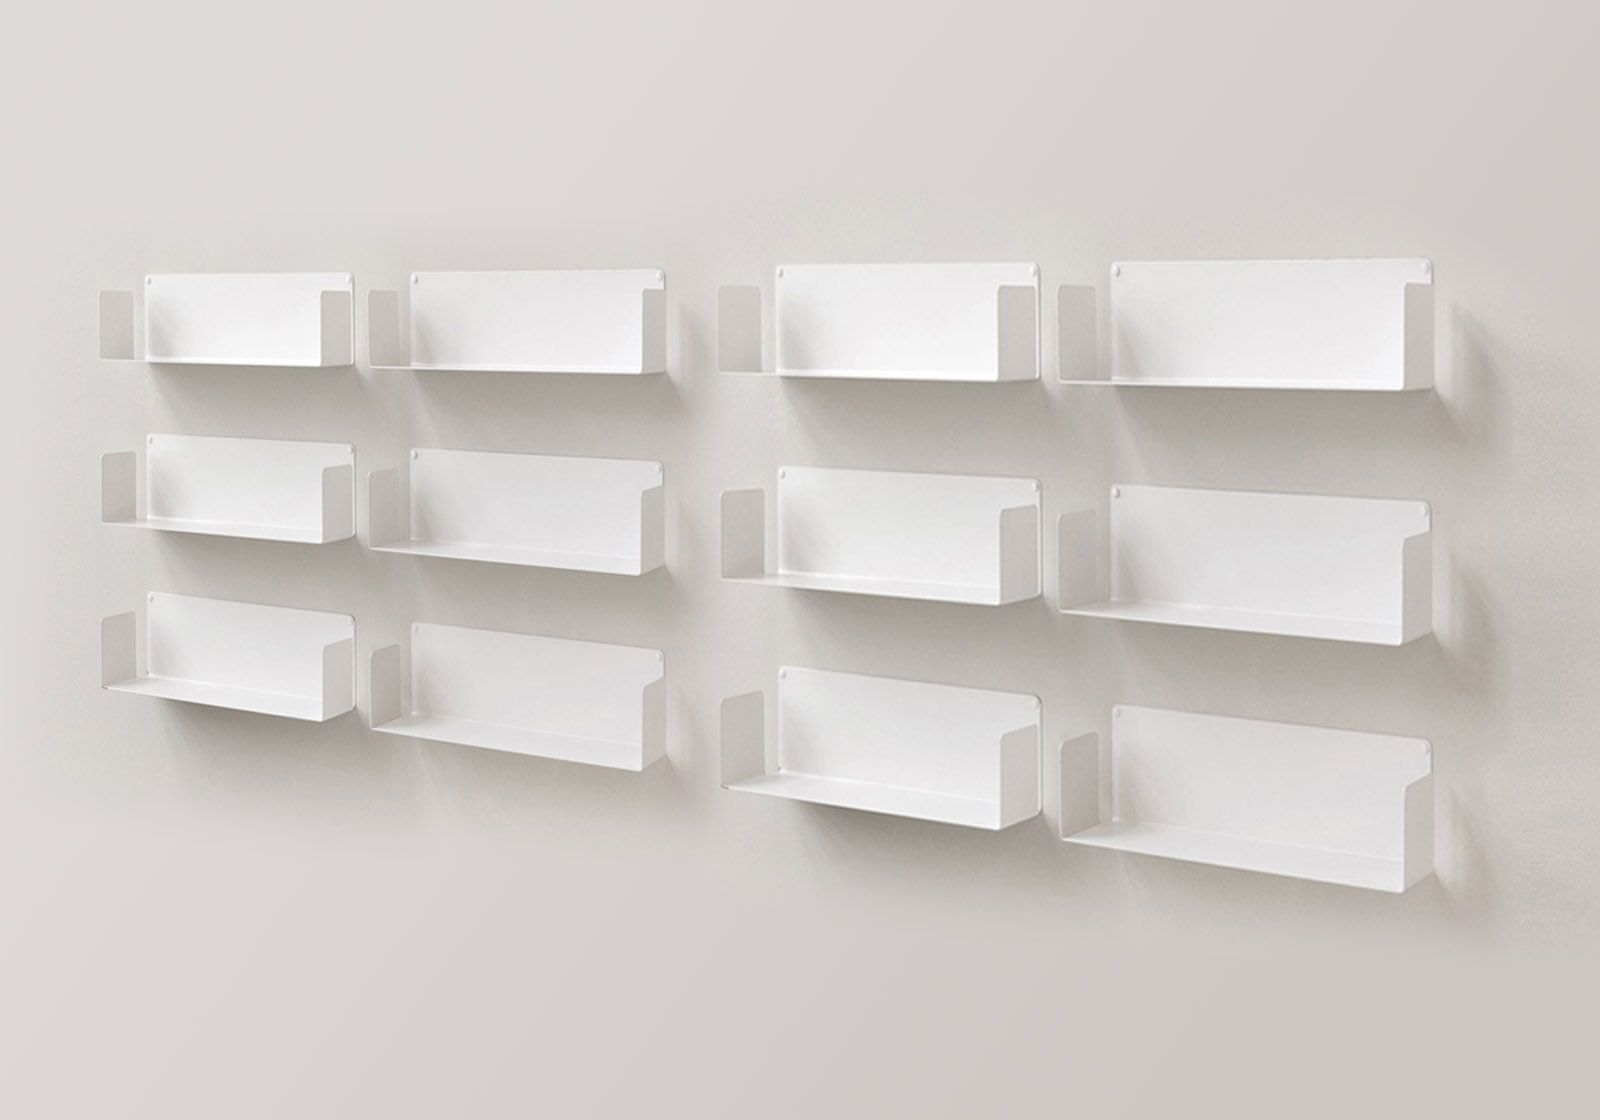 Floating Shelves 23 62 Inches Long, 12 Inch Depth Wall Shelves